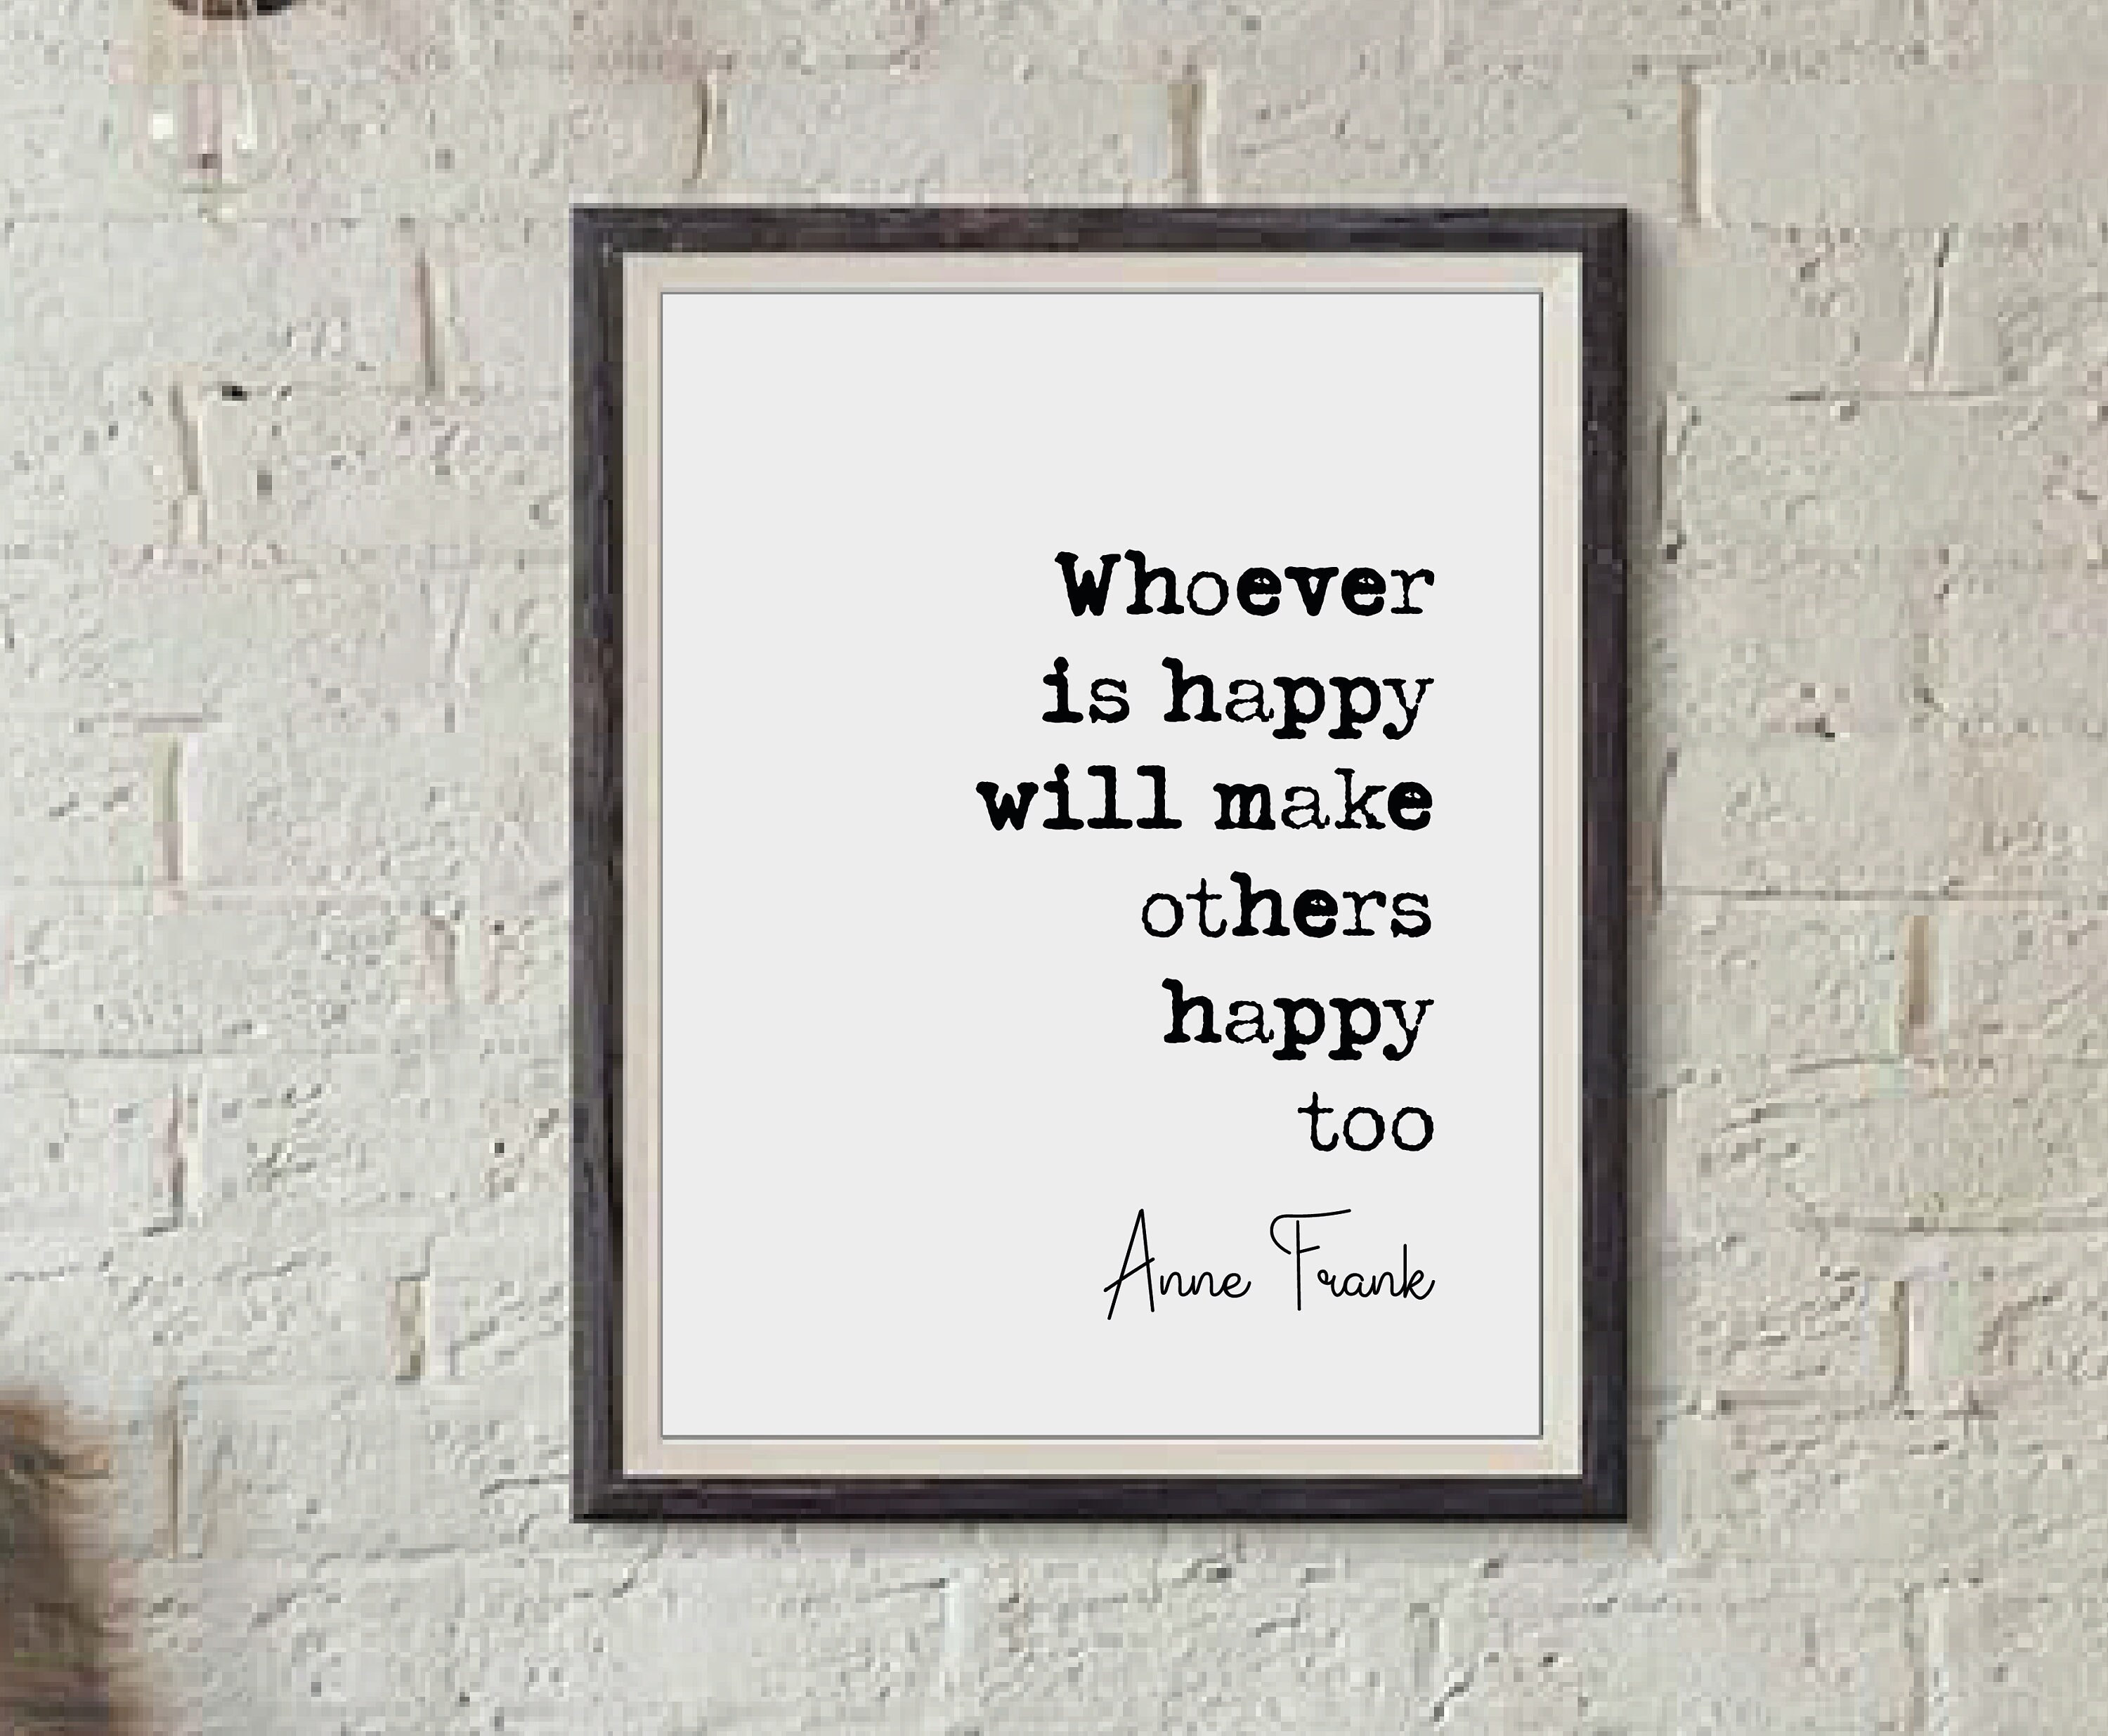 Anne Frank Quote Print Whoever is Happy Will Make Others Happy